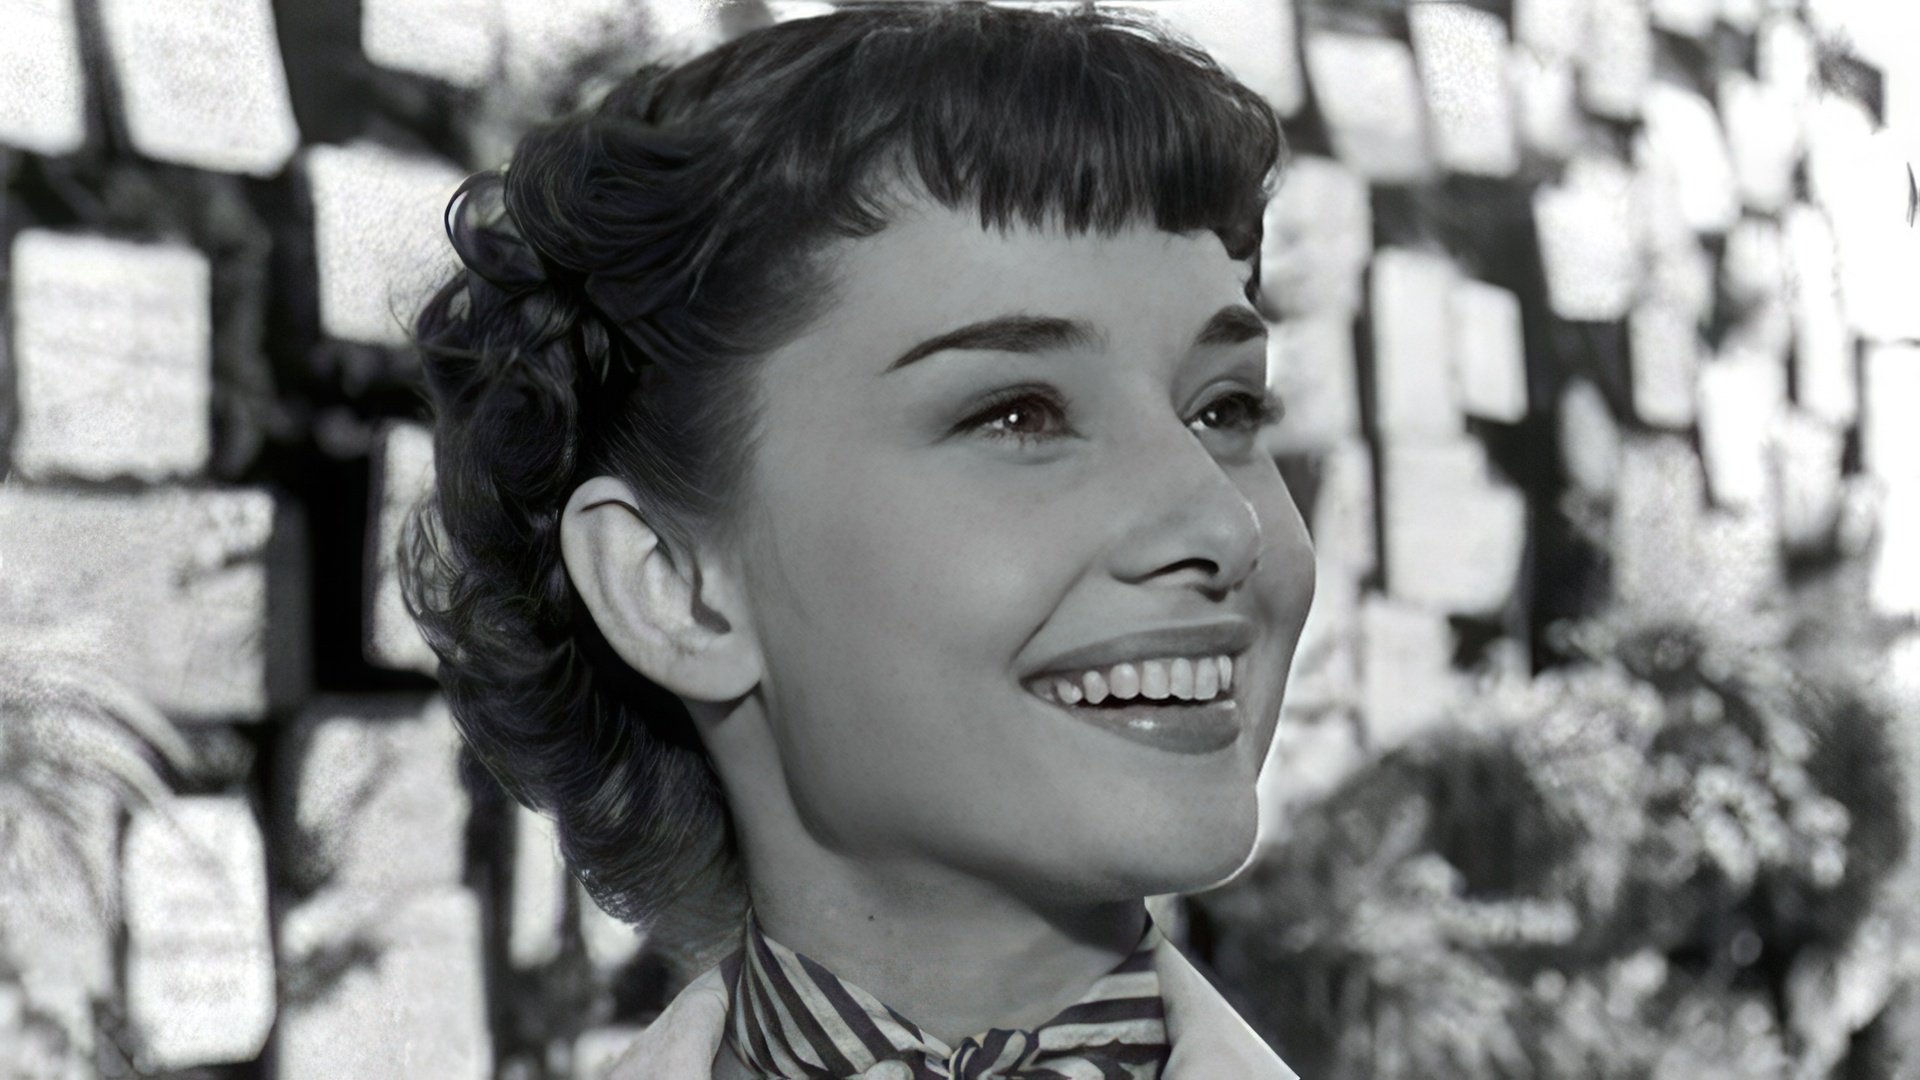 Audrey Hepburn starred in the melodrama 'Roman Holiday' which made her beloved by the whole world